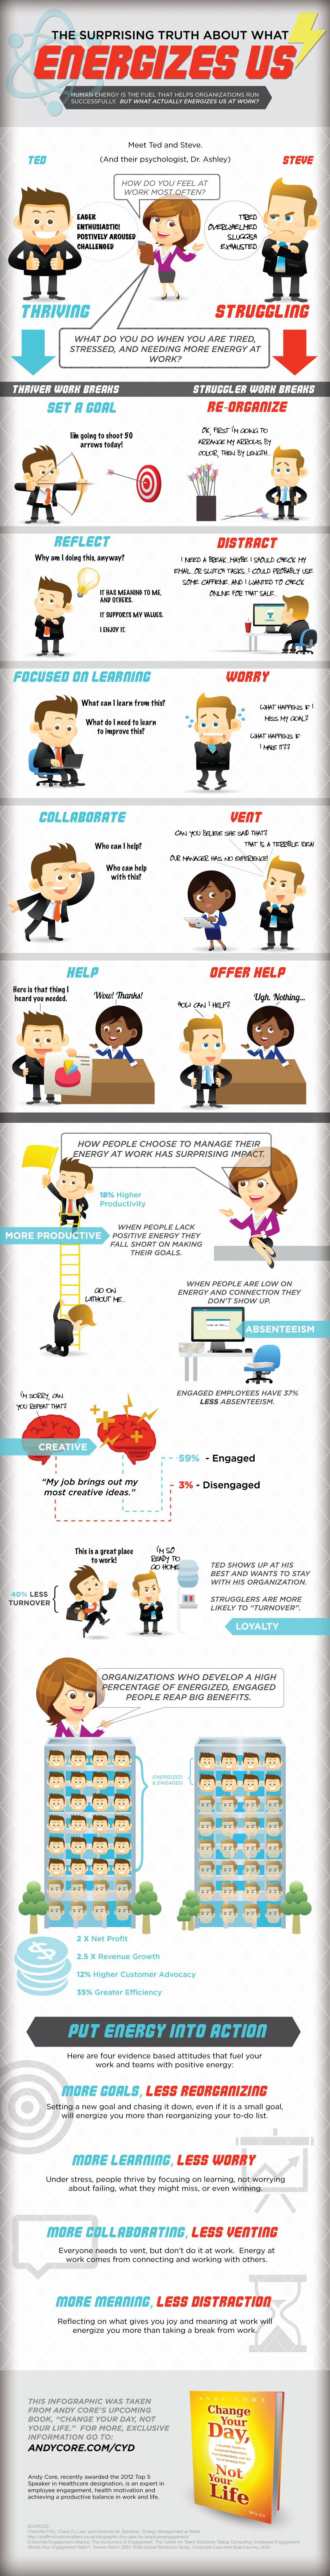 How to Feel More Energetic at Work and Increase Productivity Infographic